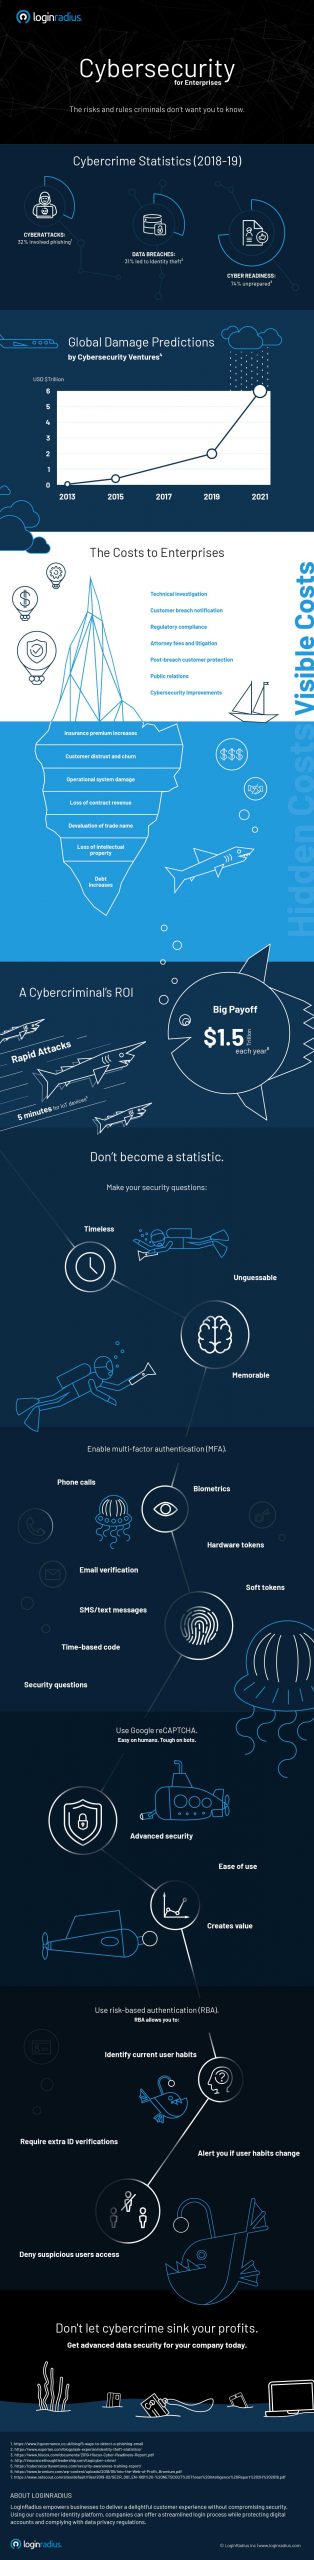 Cybersecurity Best Practices For Enterprises Infographic 1 Scaled, Industry Today